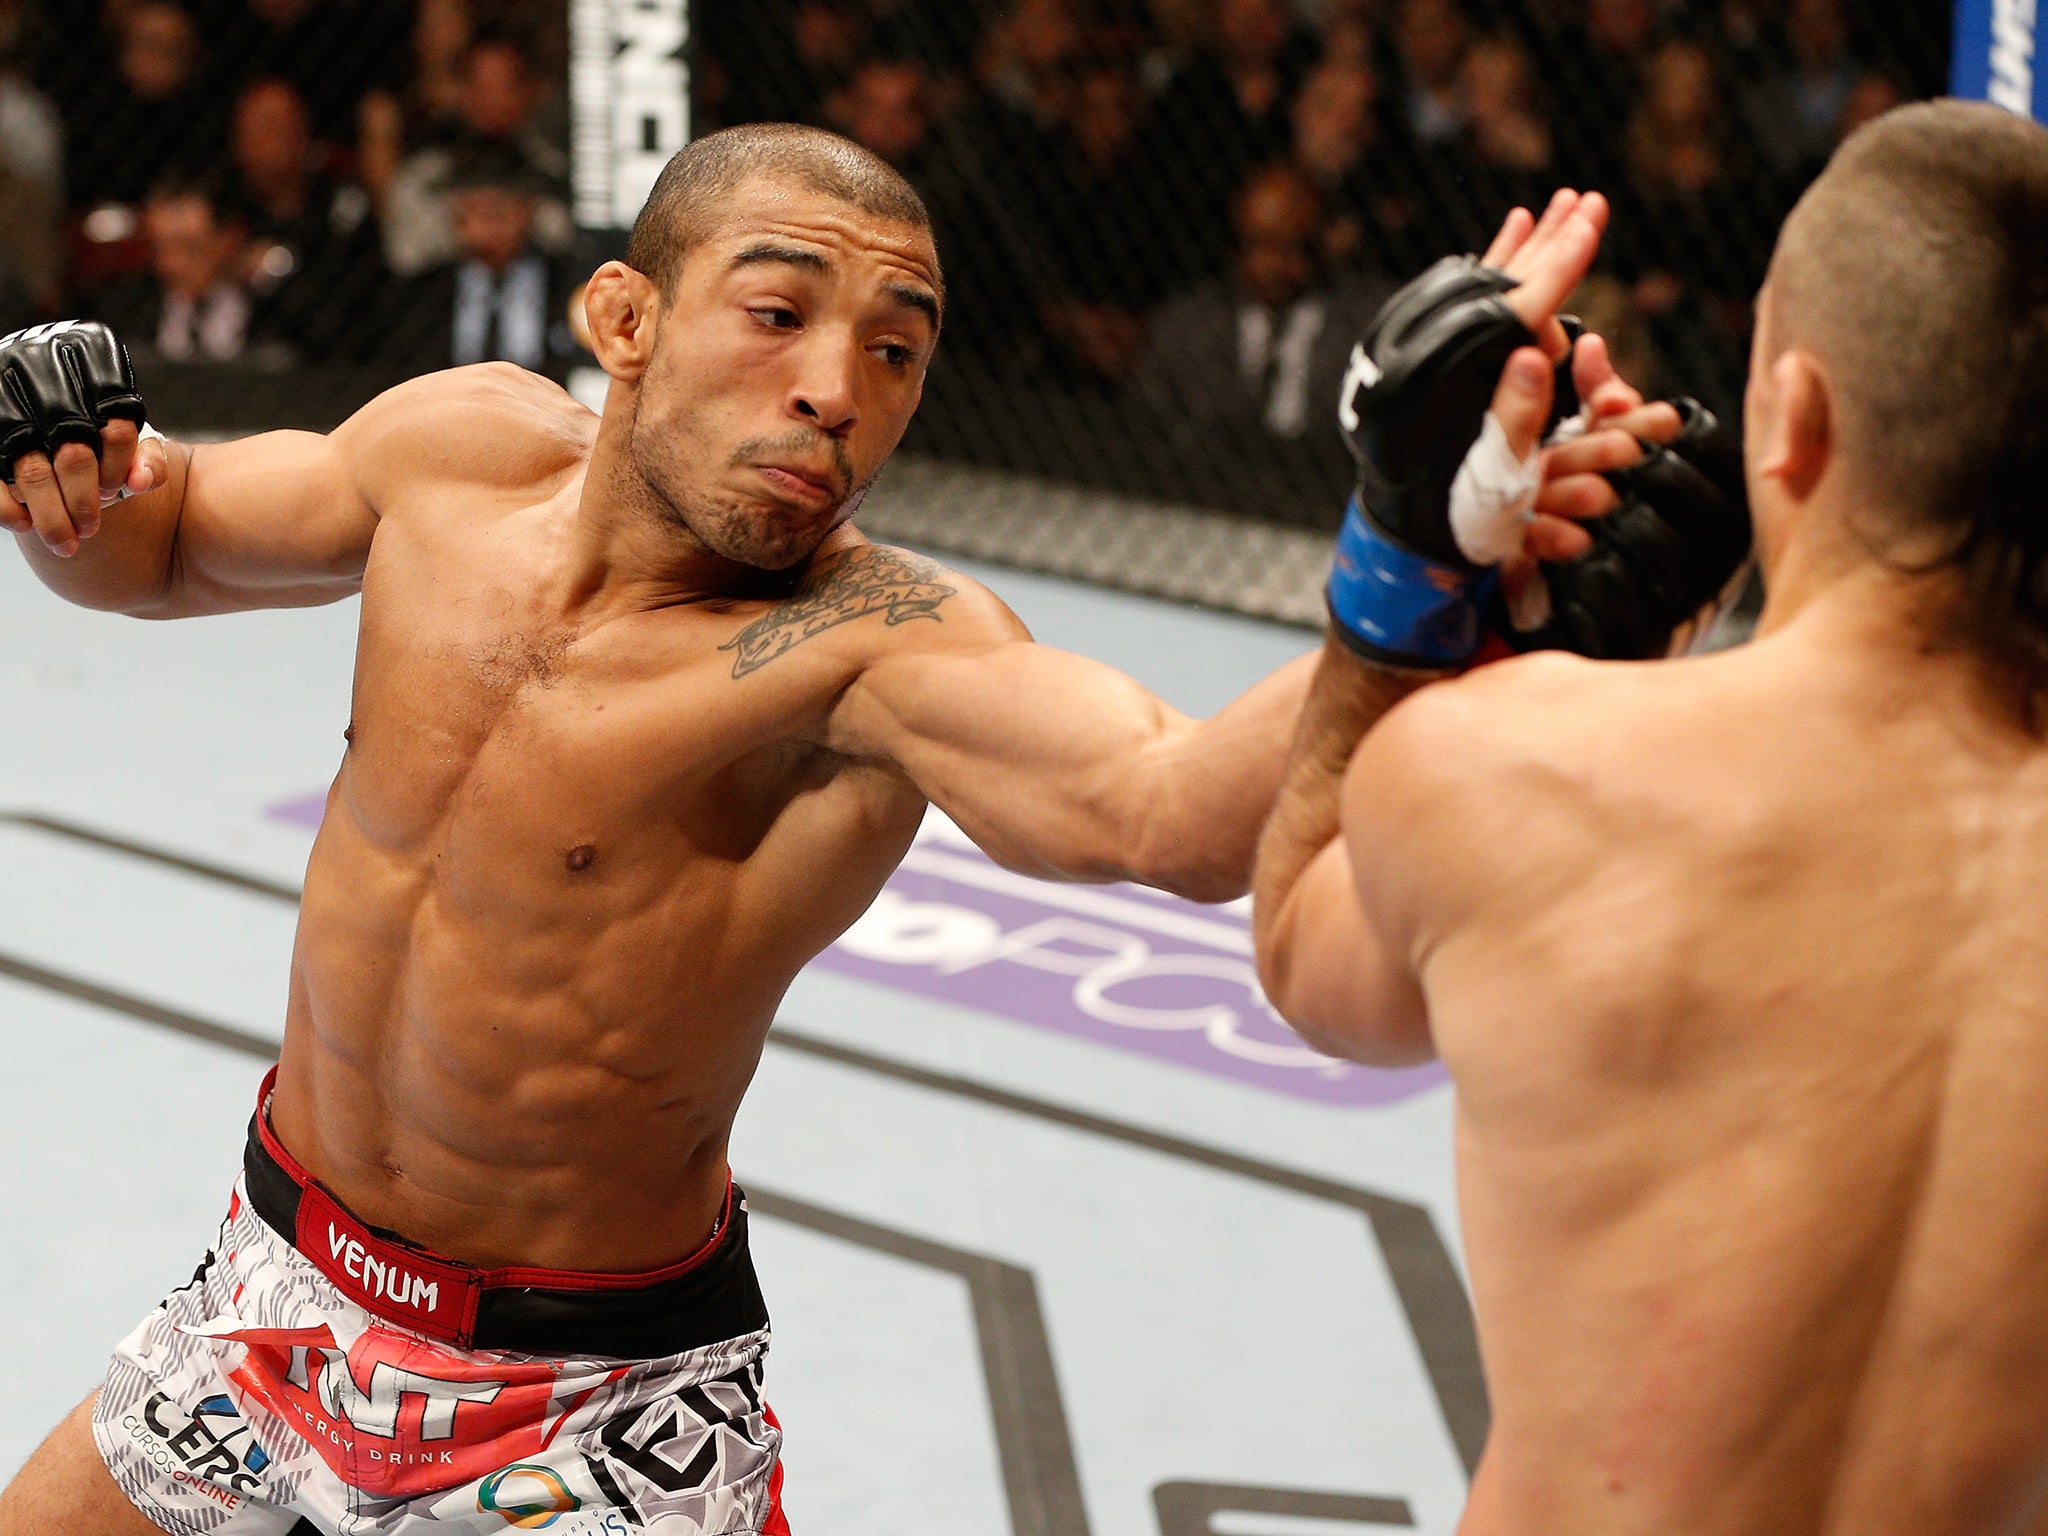 &#13;
Aldo will hope to gain a rematch with McGregor by beating Edgar&#13;